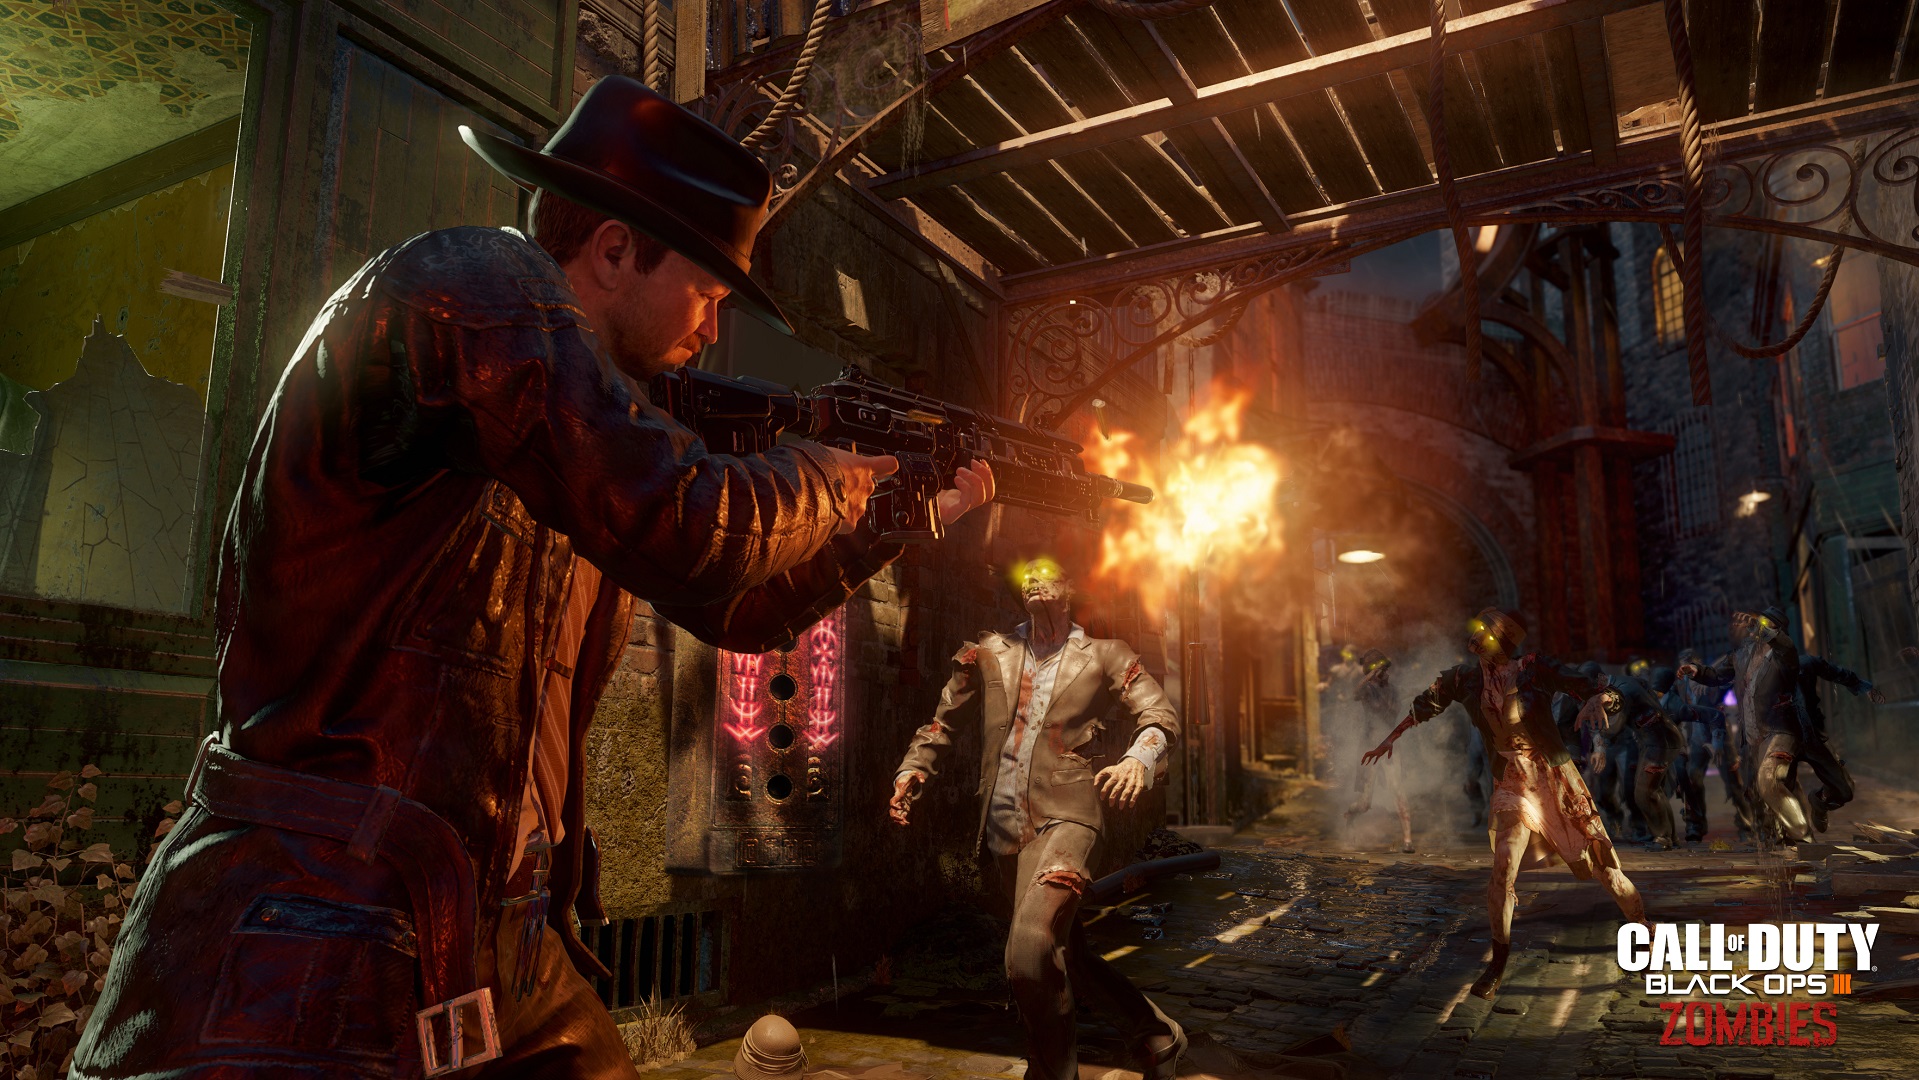 Ps4 Download Size Revealed For Call Of Duty Black Ops Iii Zombies Chronicles